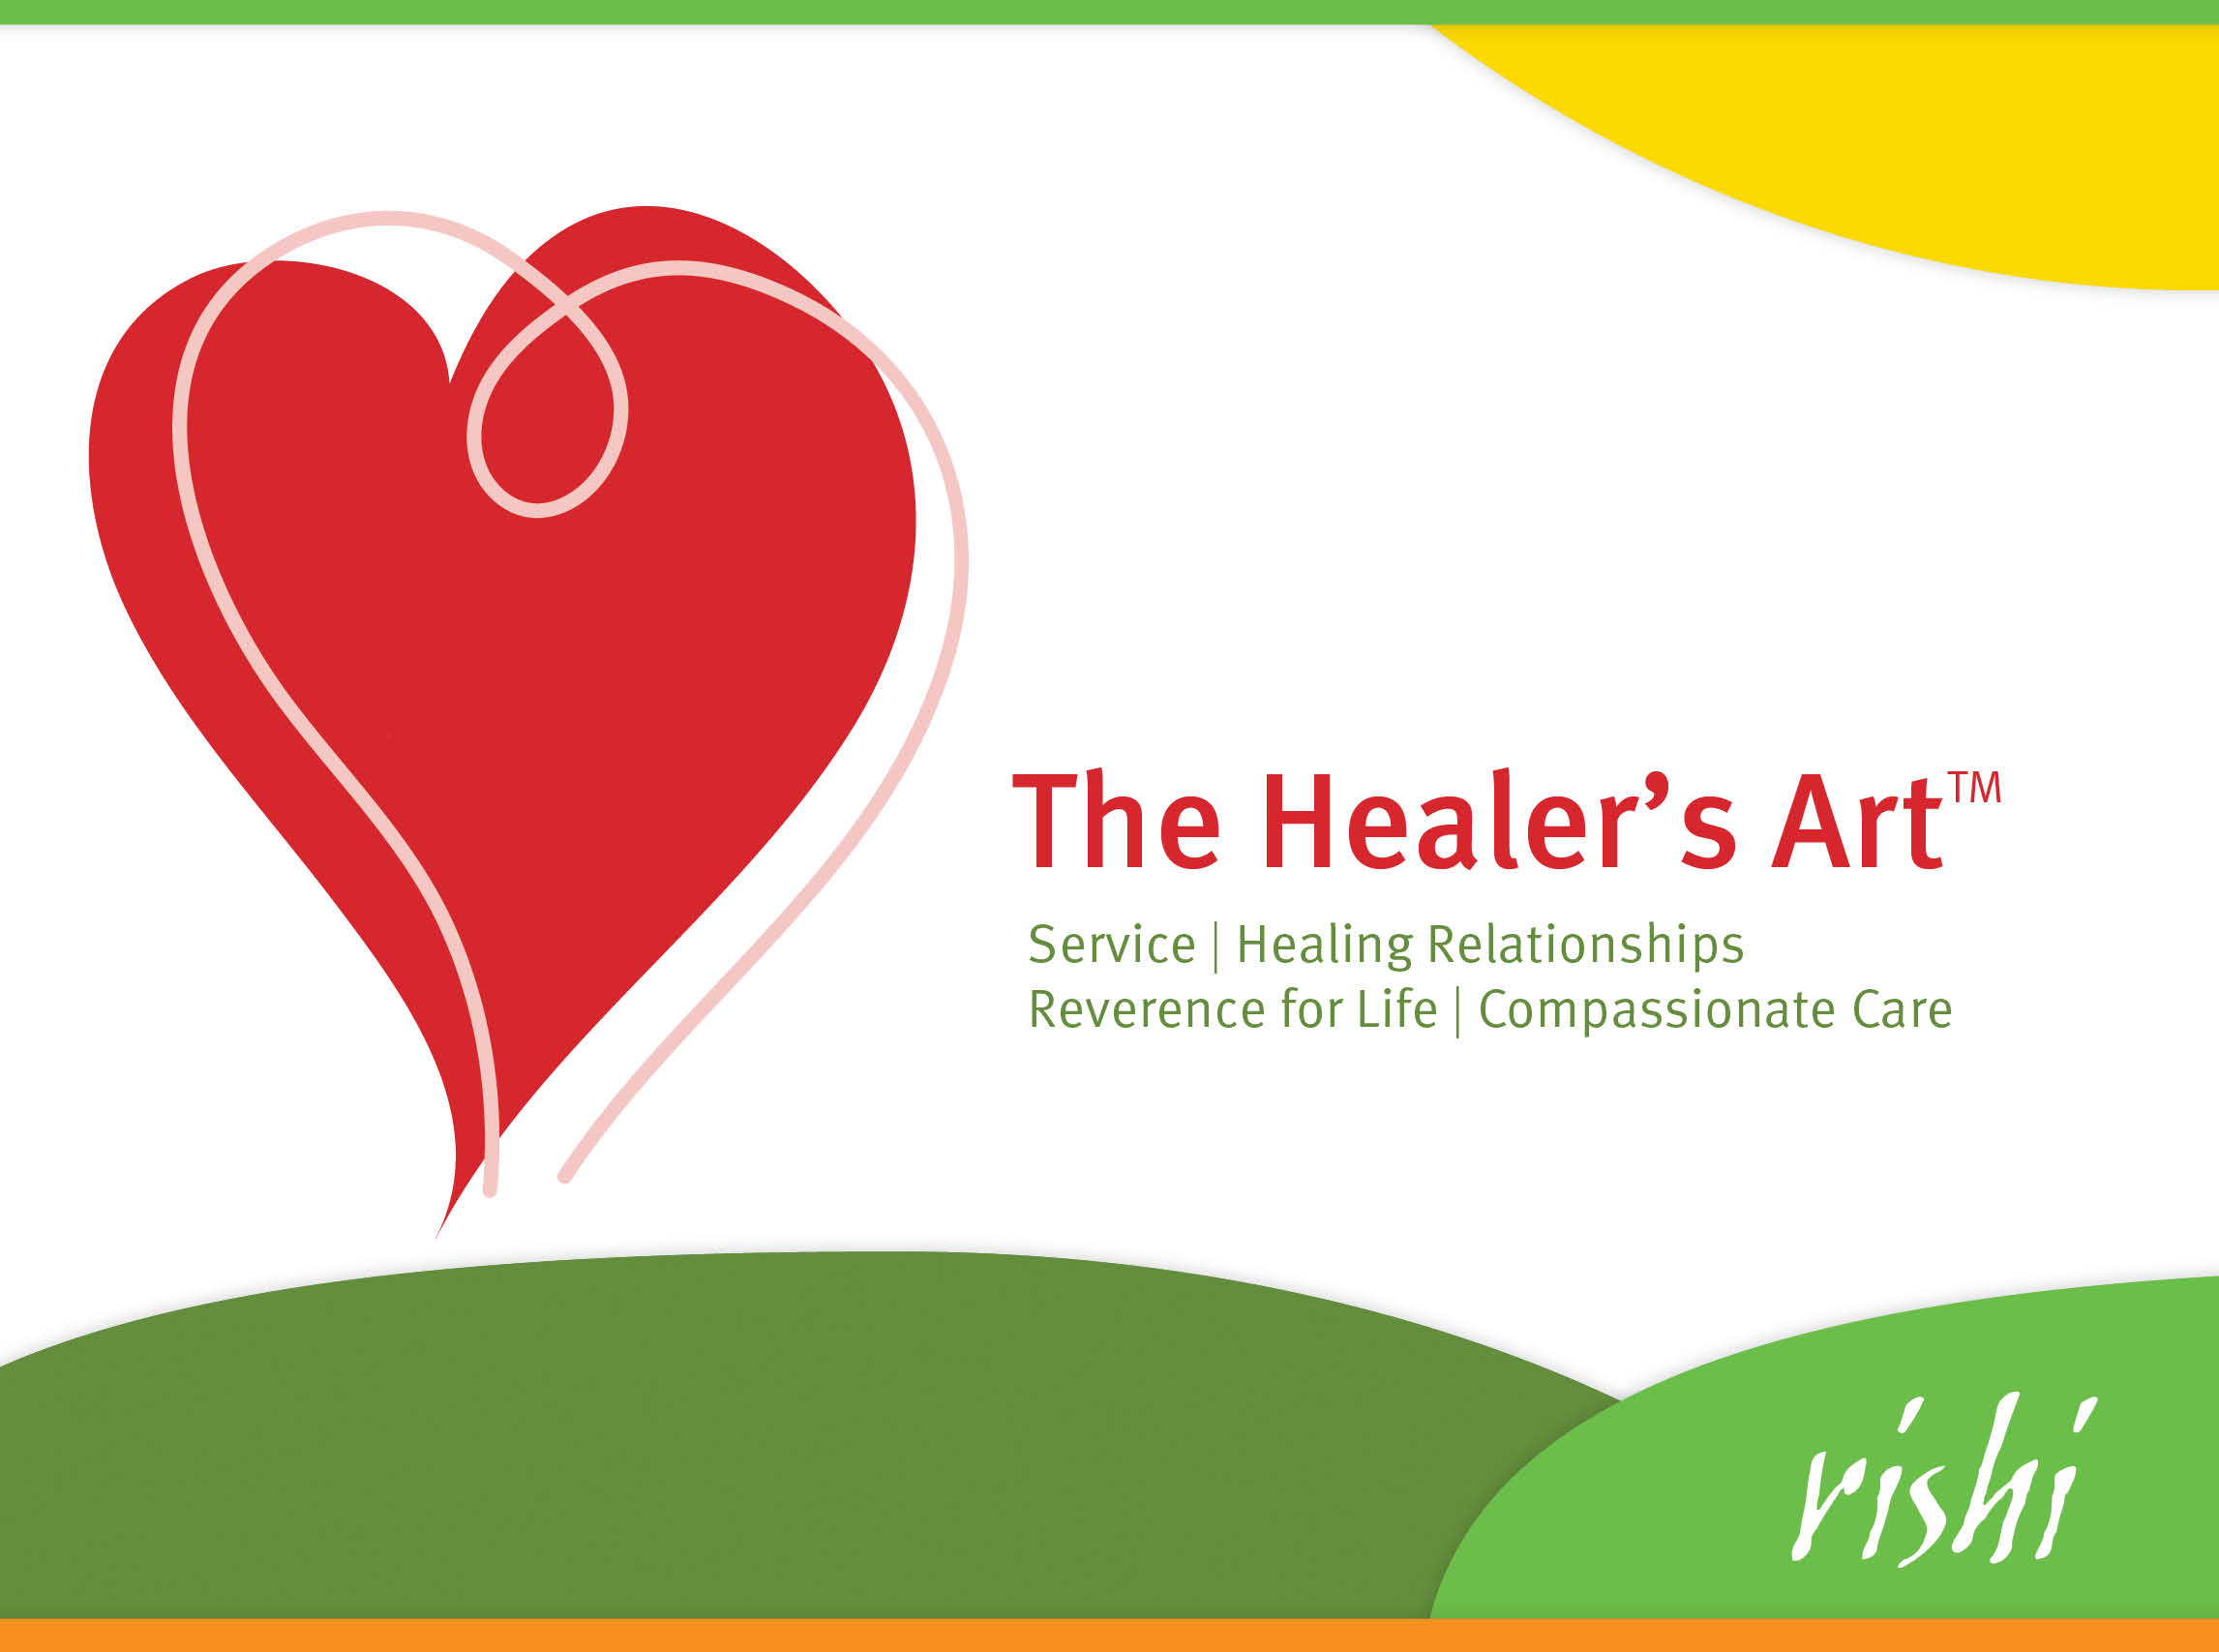 The Healer's Art Service | Healing Relationships | Reverence for Life | Compassionate Care